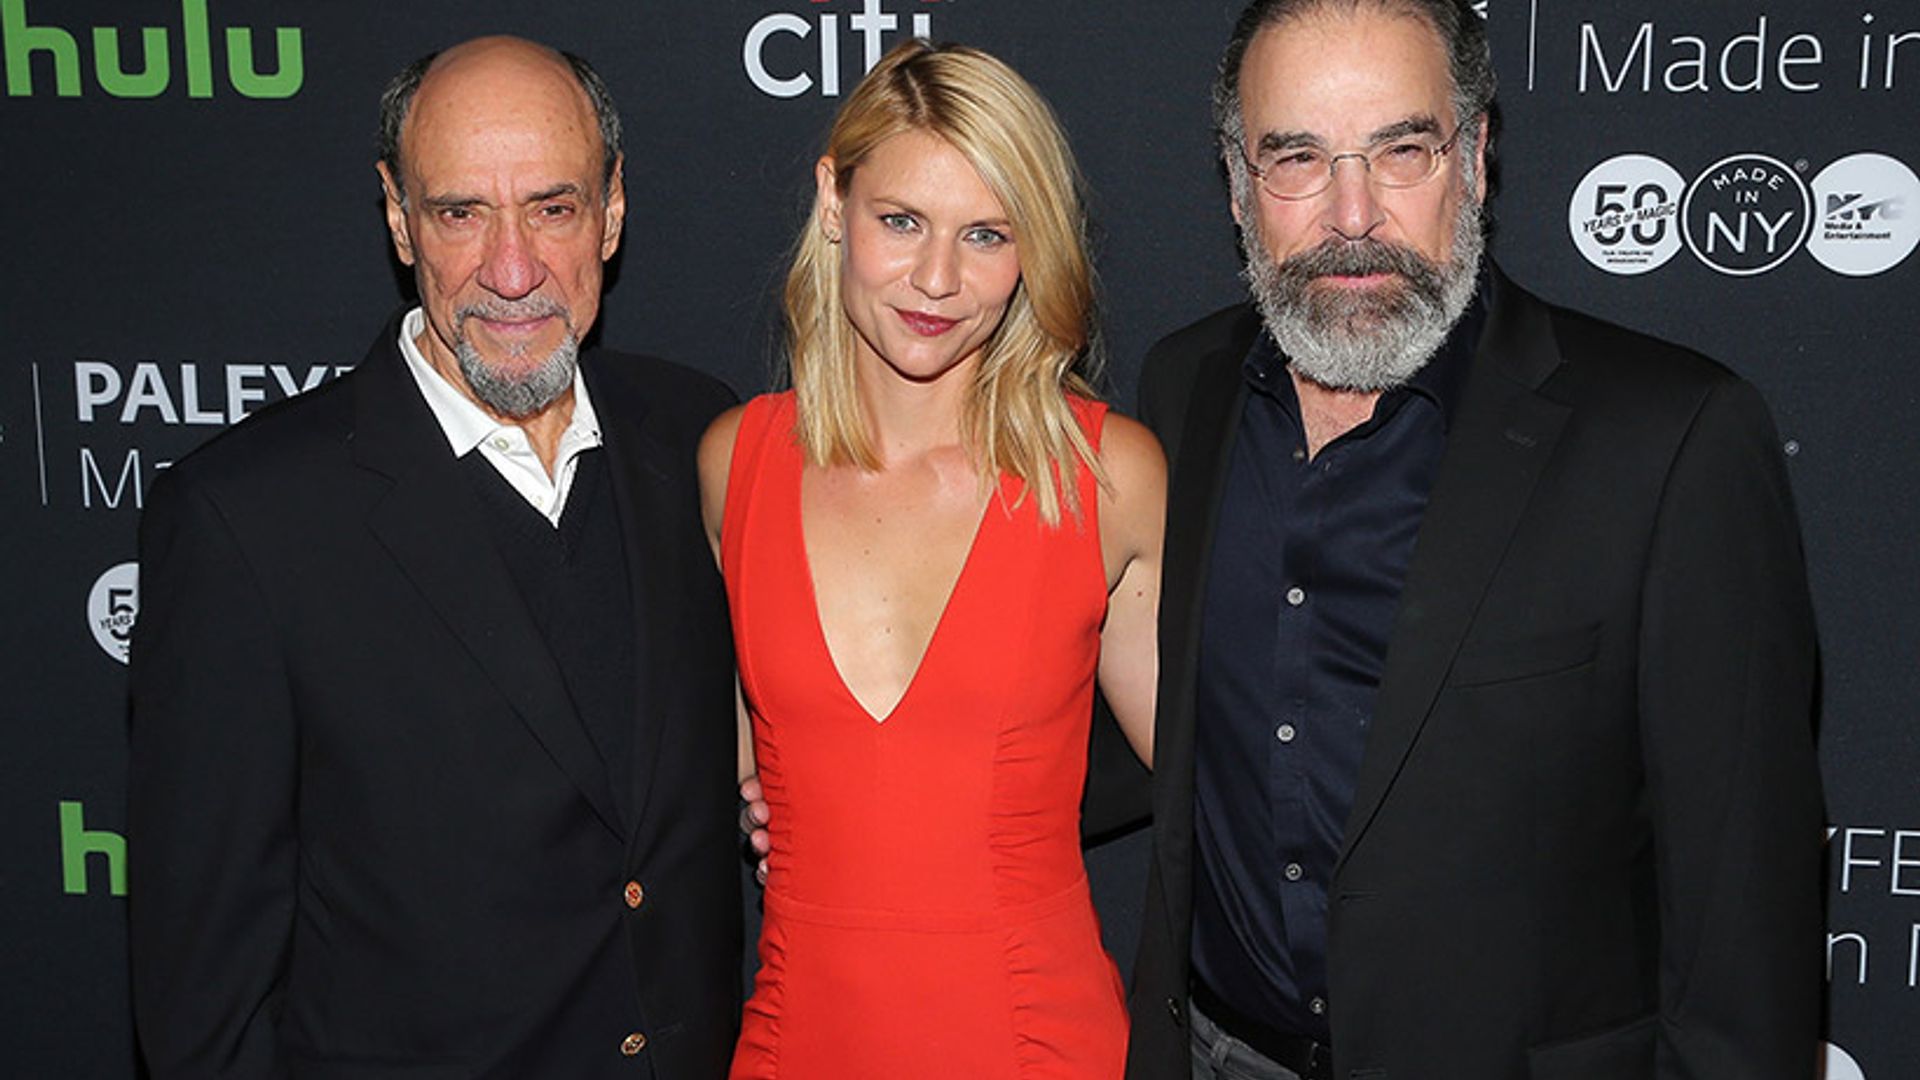 Most surprising roles from the cast of Homeland